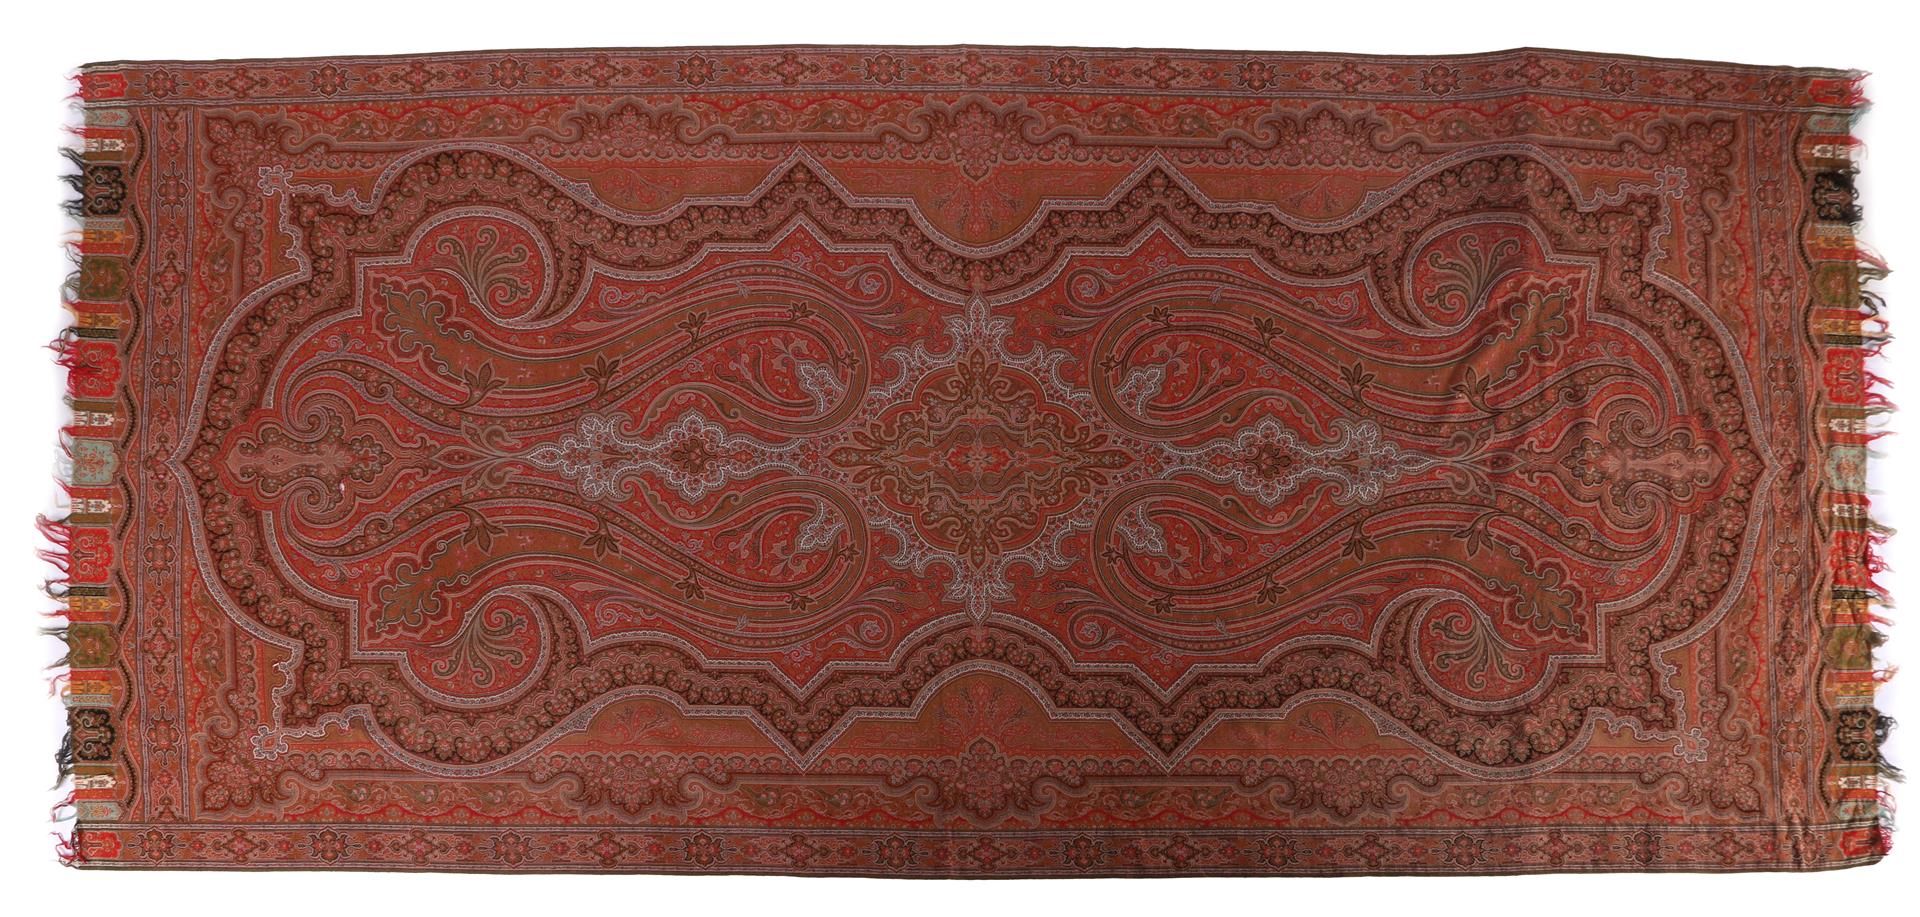 Woven cloth with oriental decor